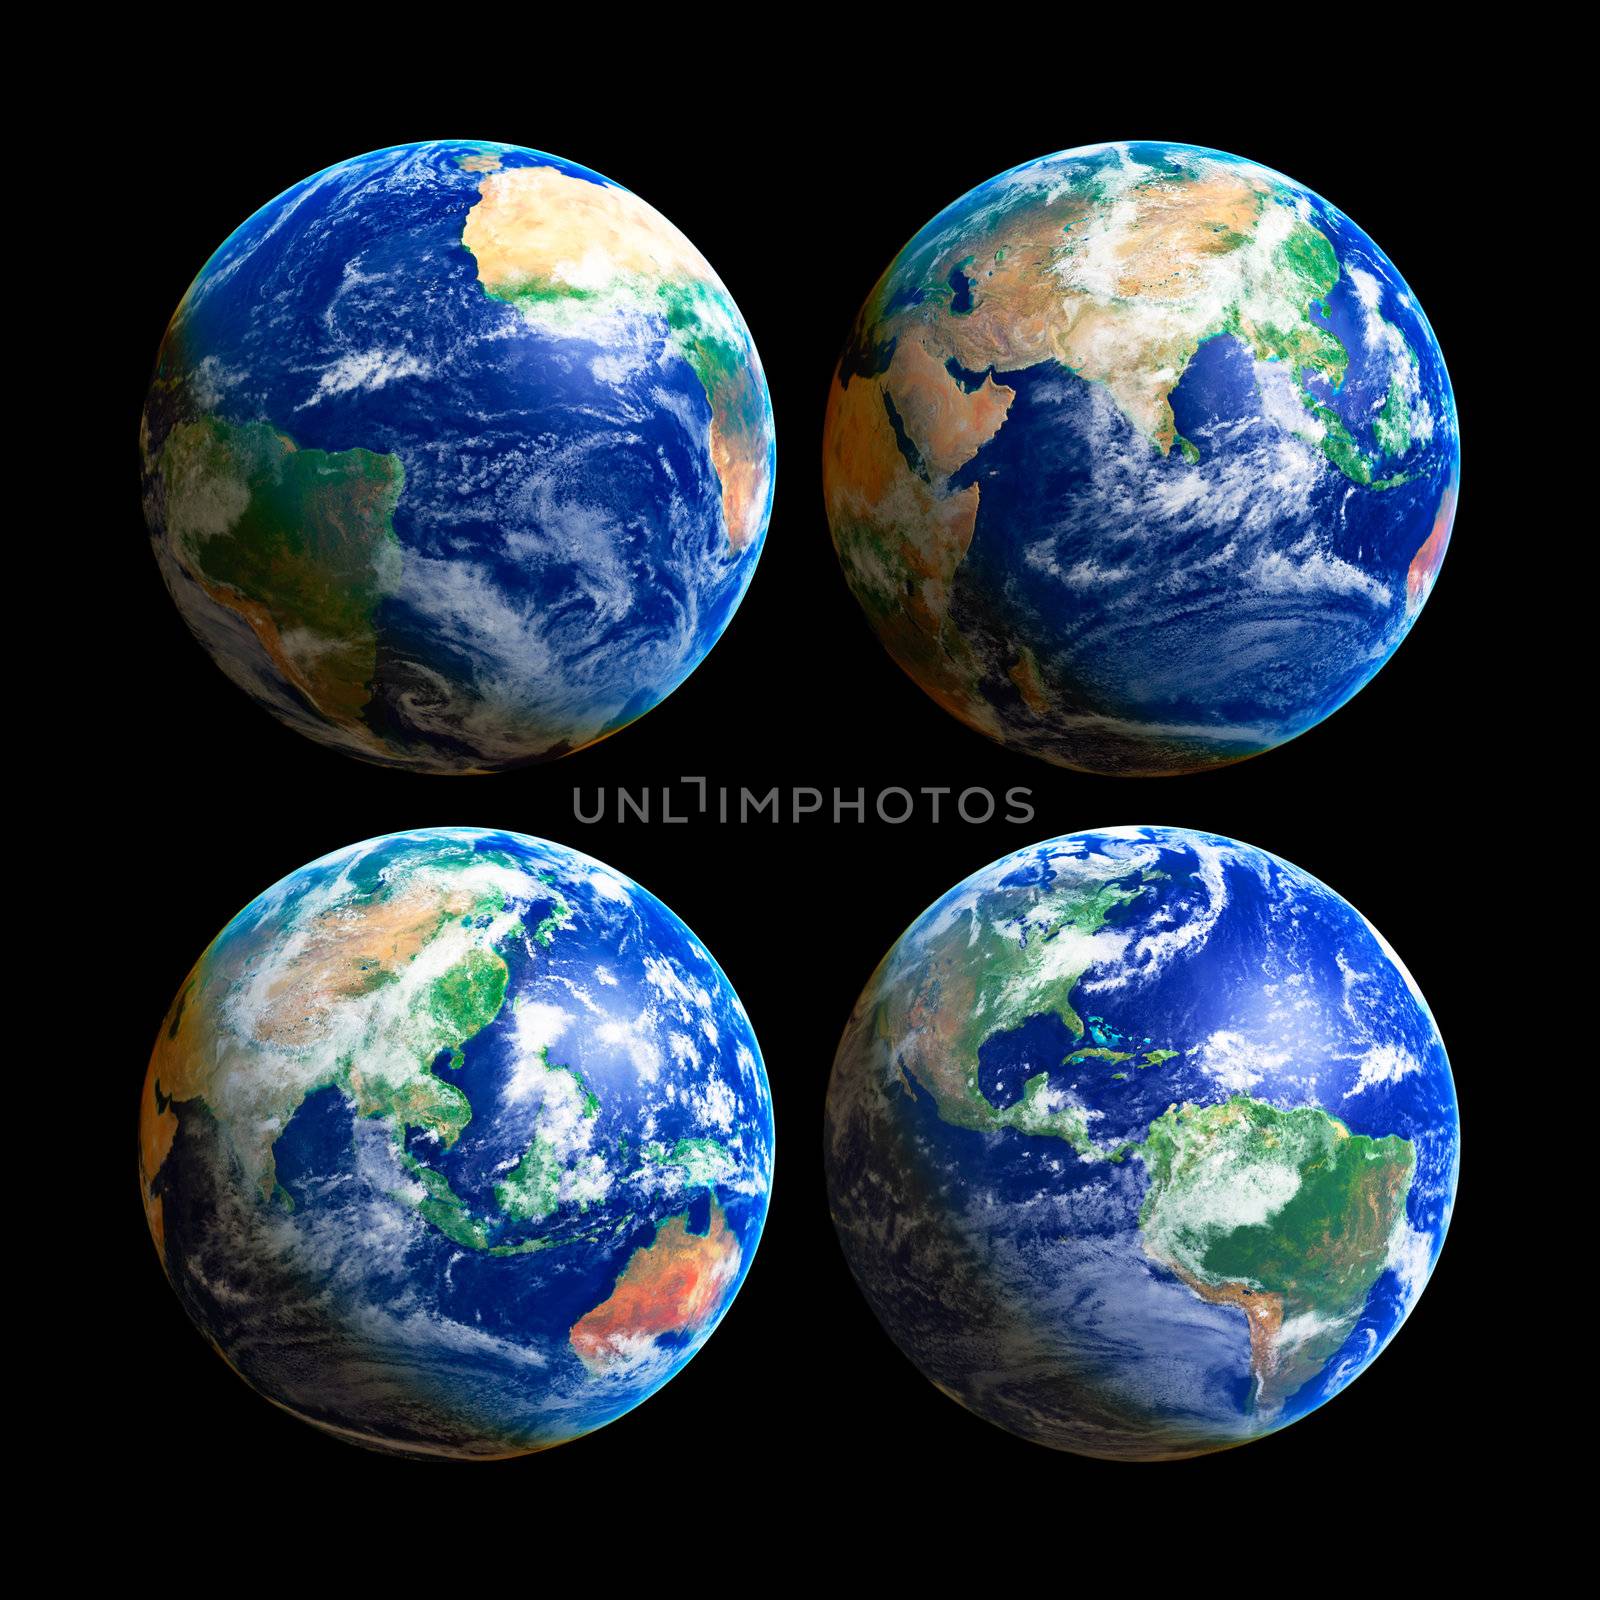 Four Earth Globes with clouds, high res pictures